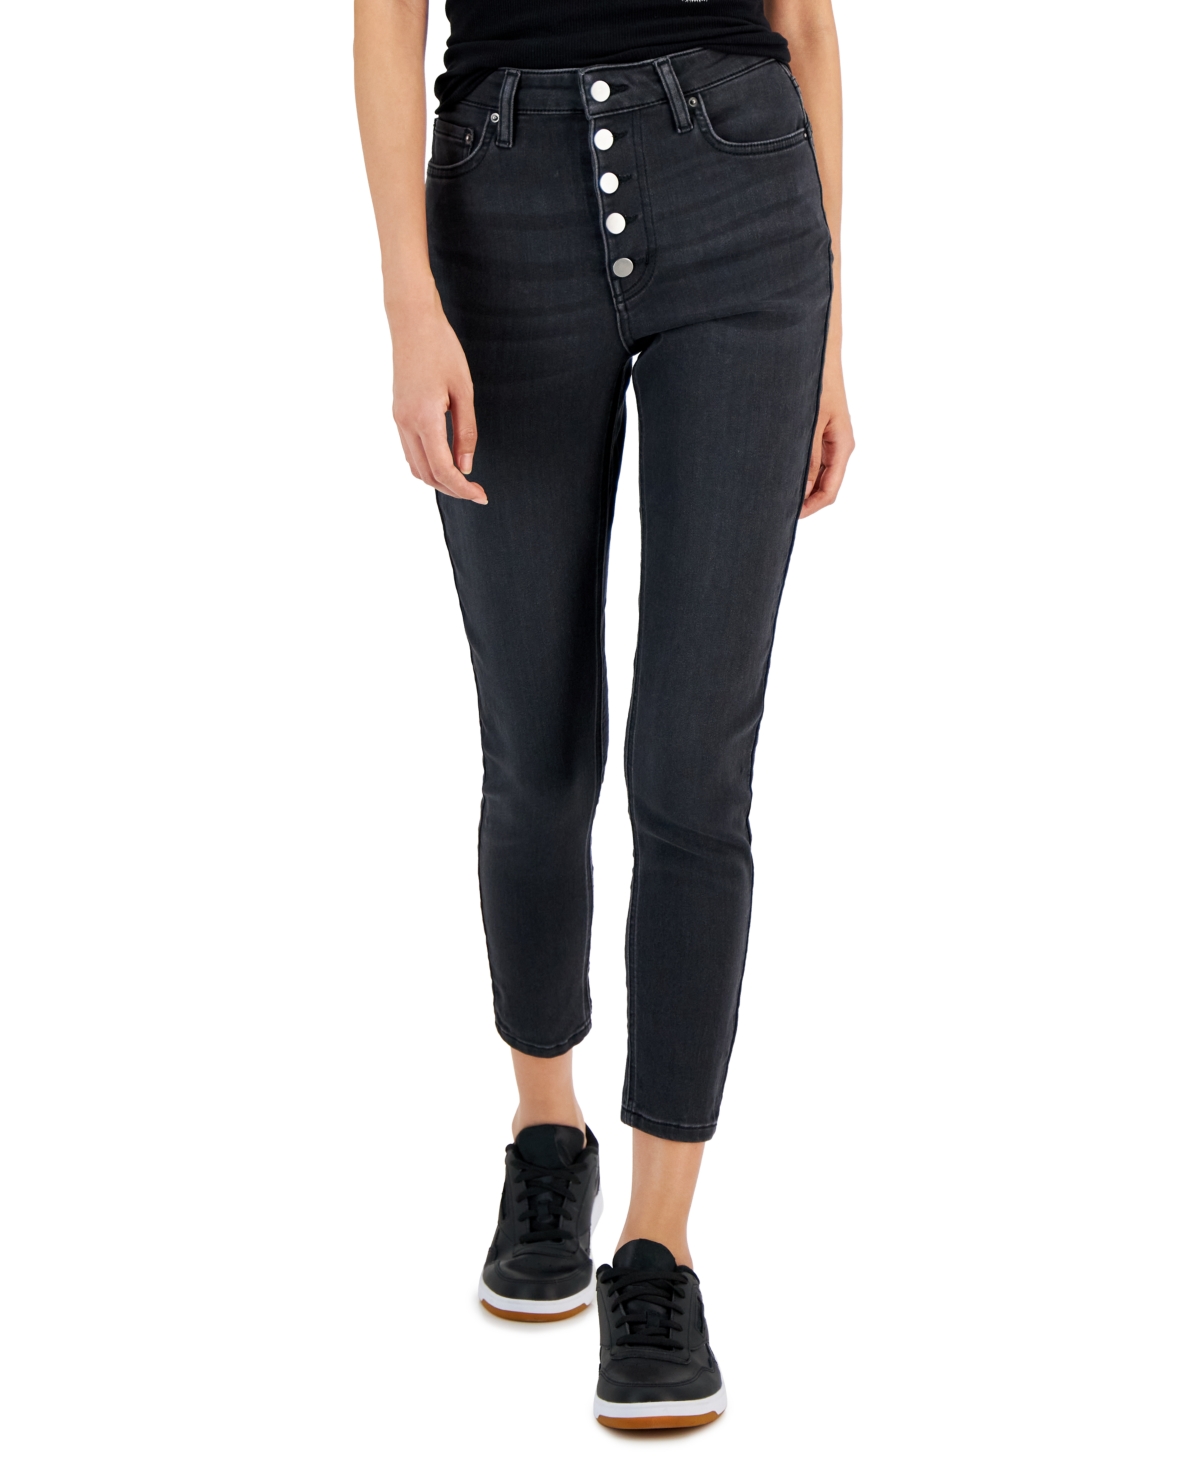 Juniors' Button-Fly Mid-Rise Skinny Ankle Jeans - Black